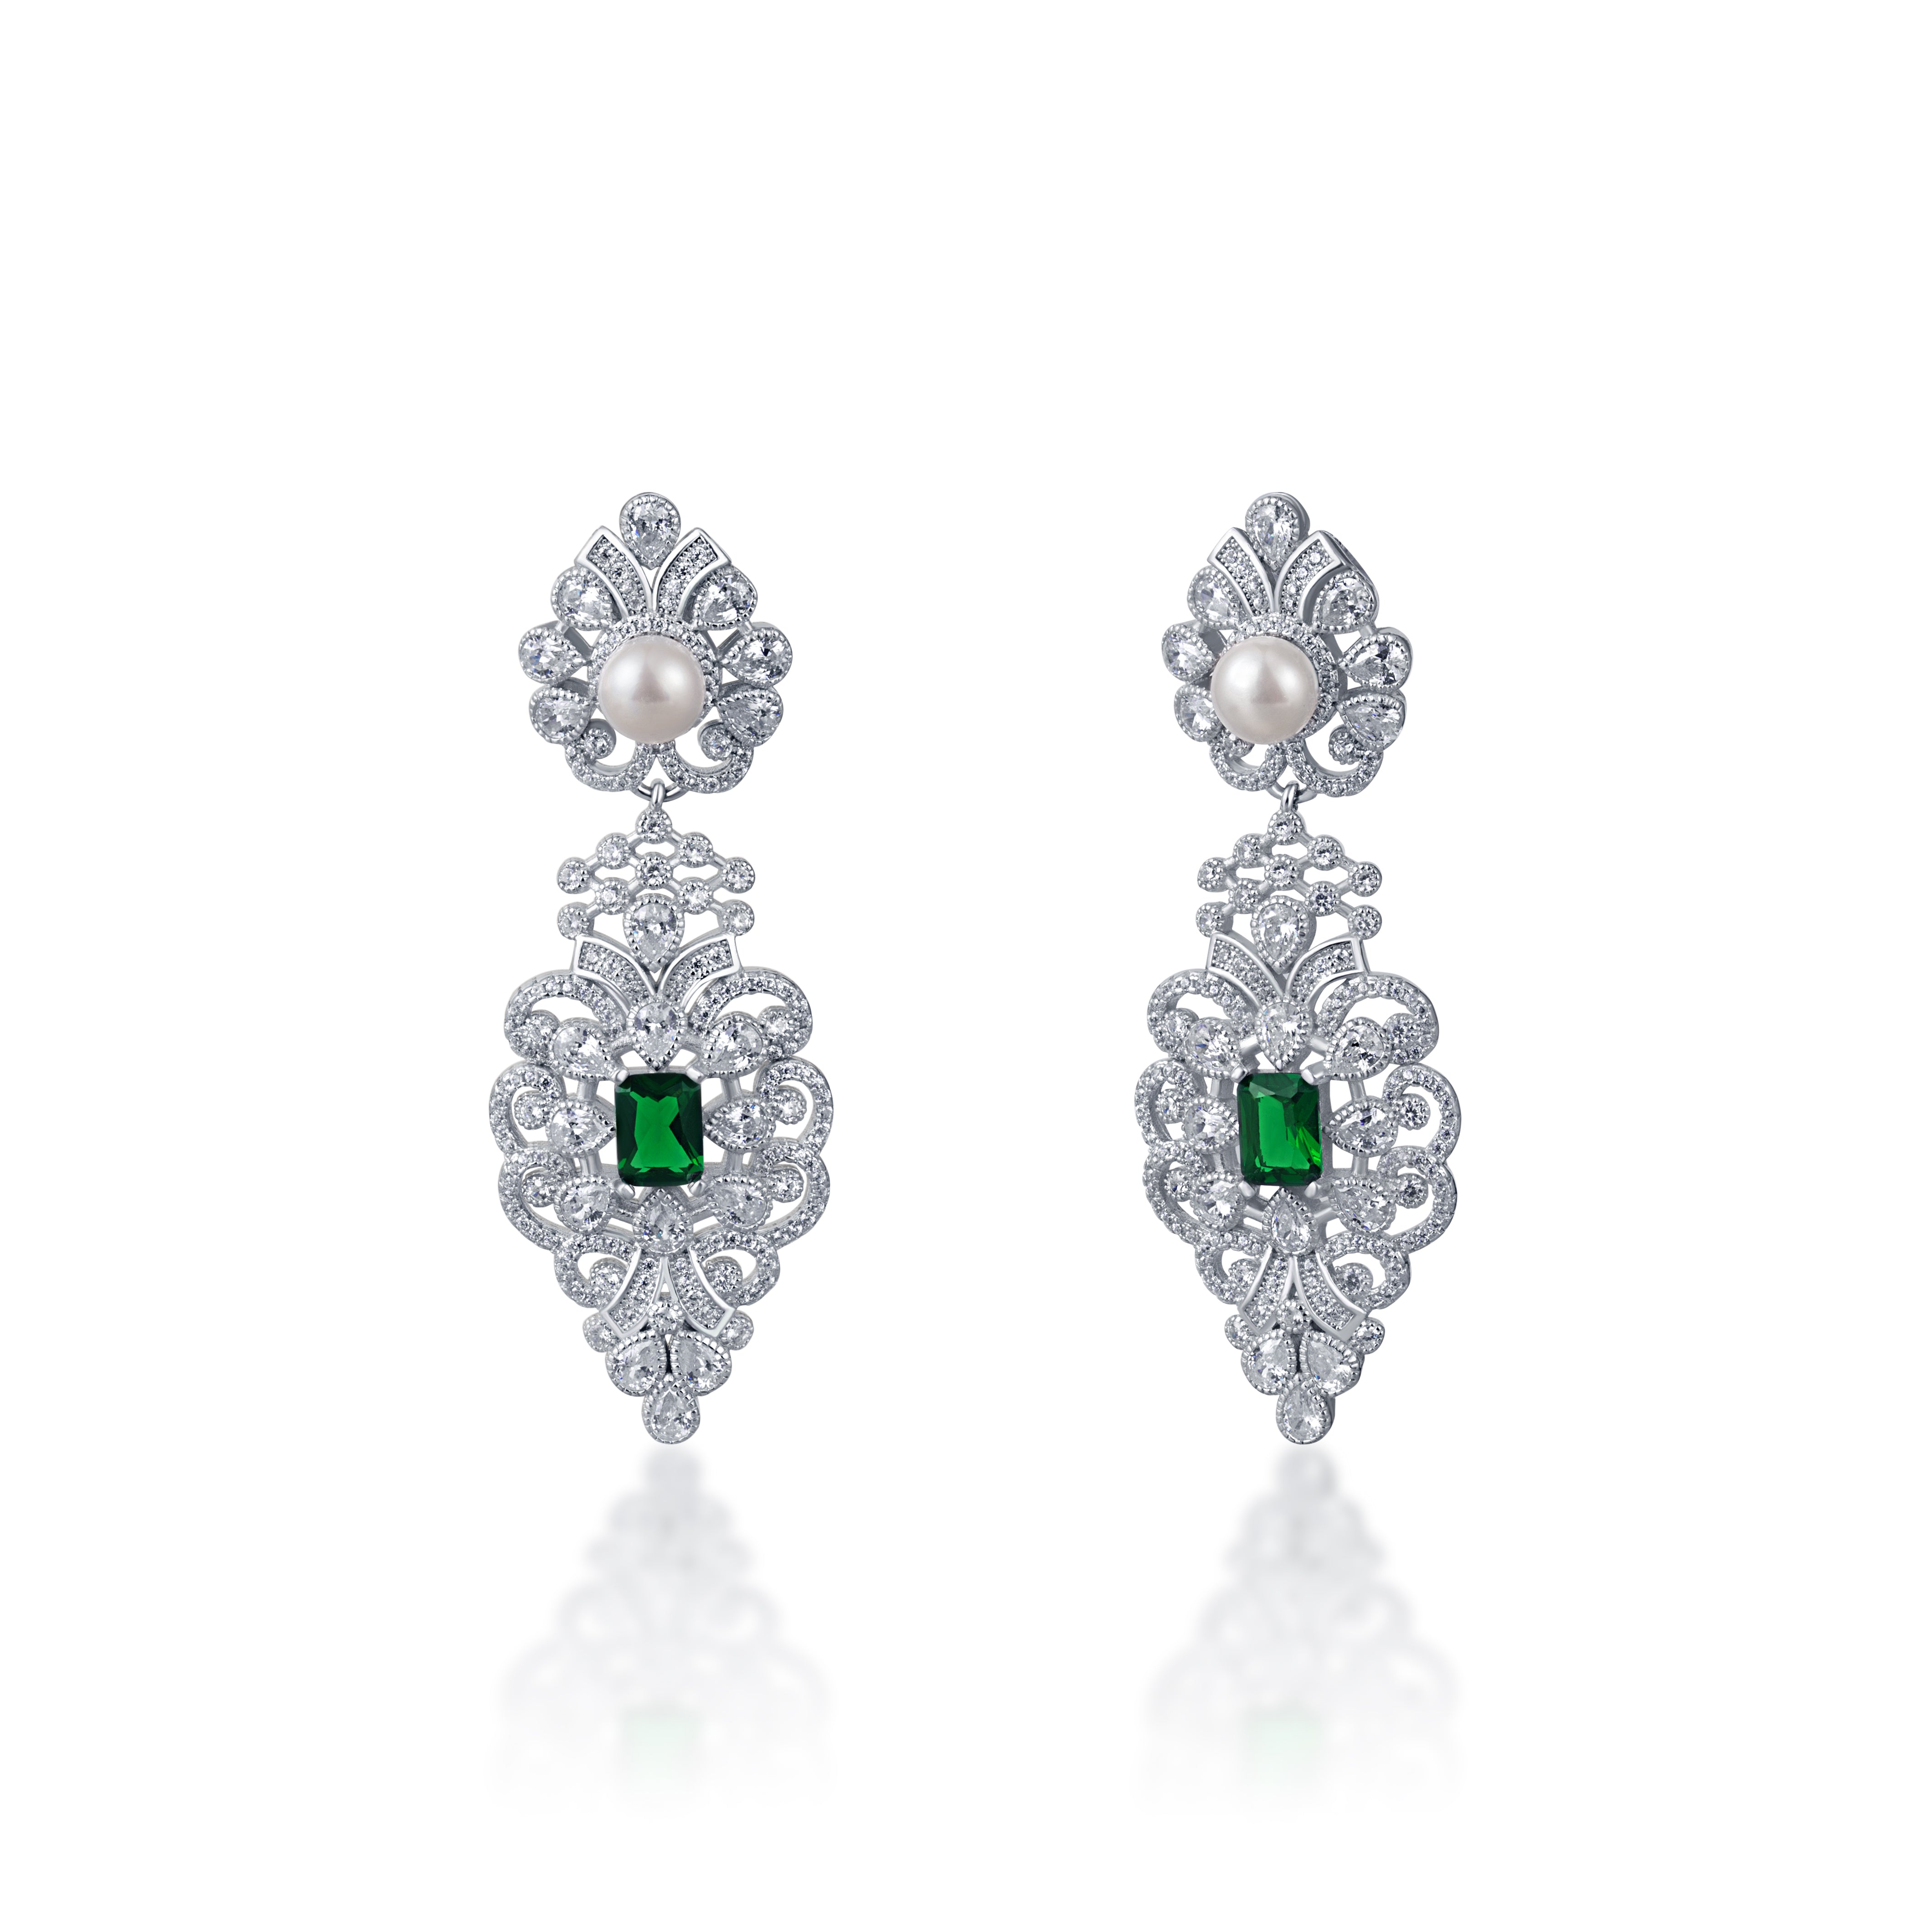 92.5 sterling silver chandelier earring embedded with green stone, sparkling zirconias and pearls from cocktail range